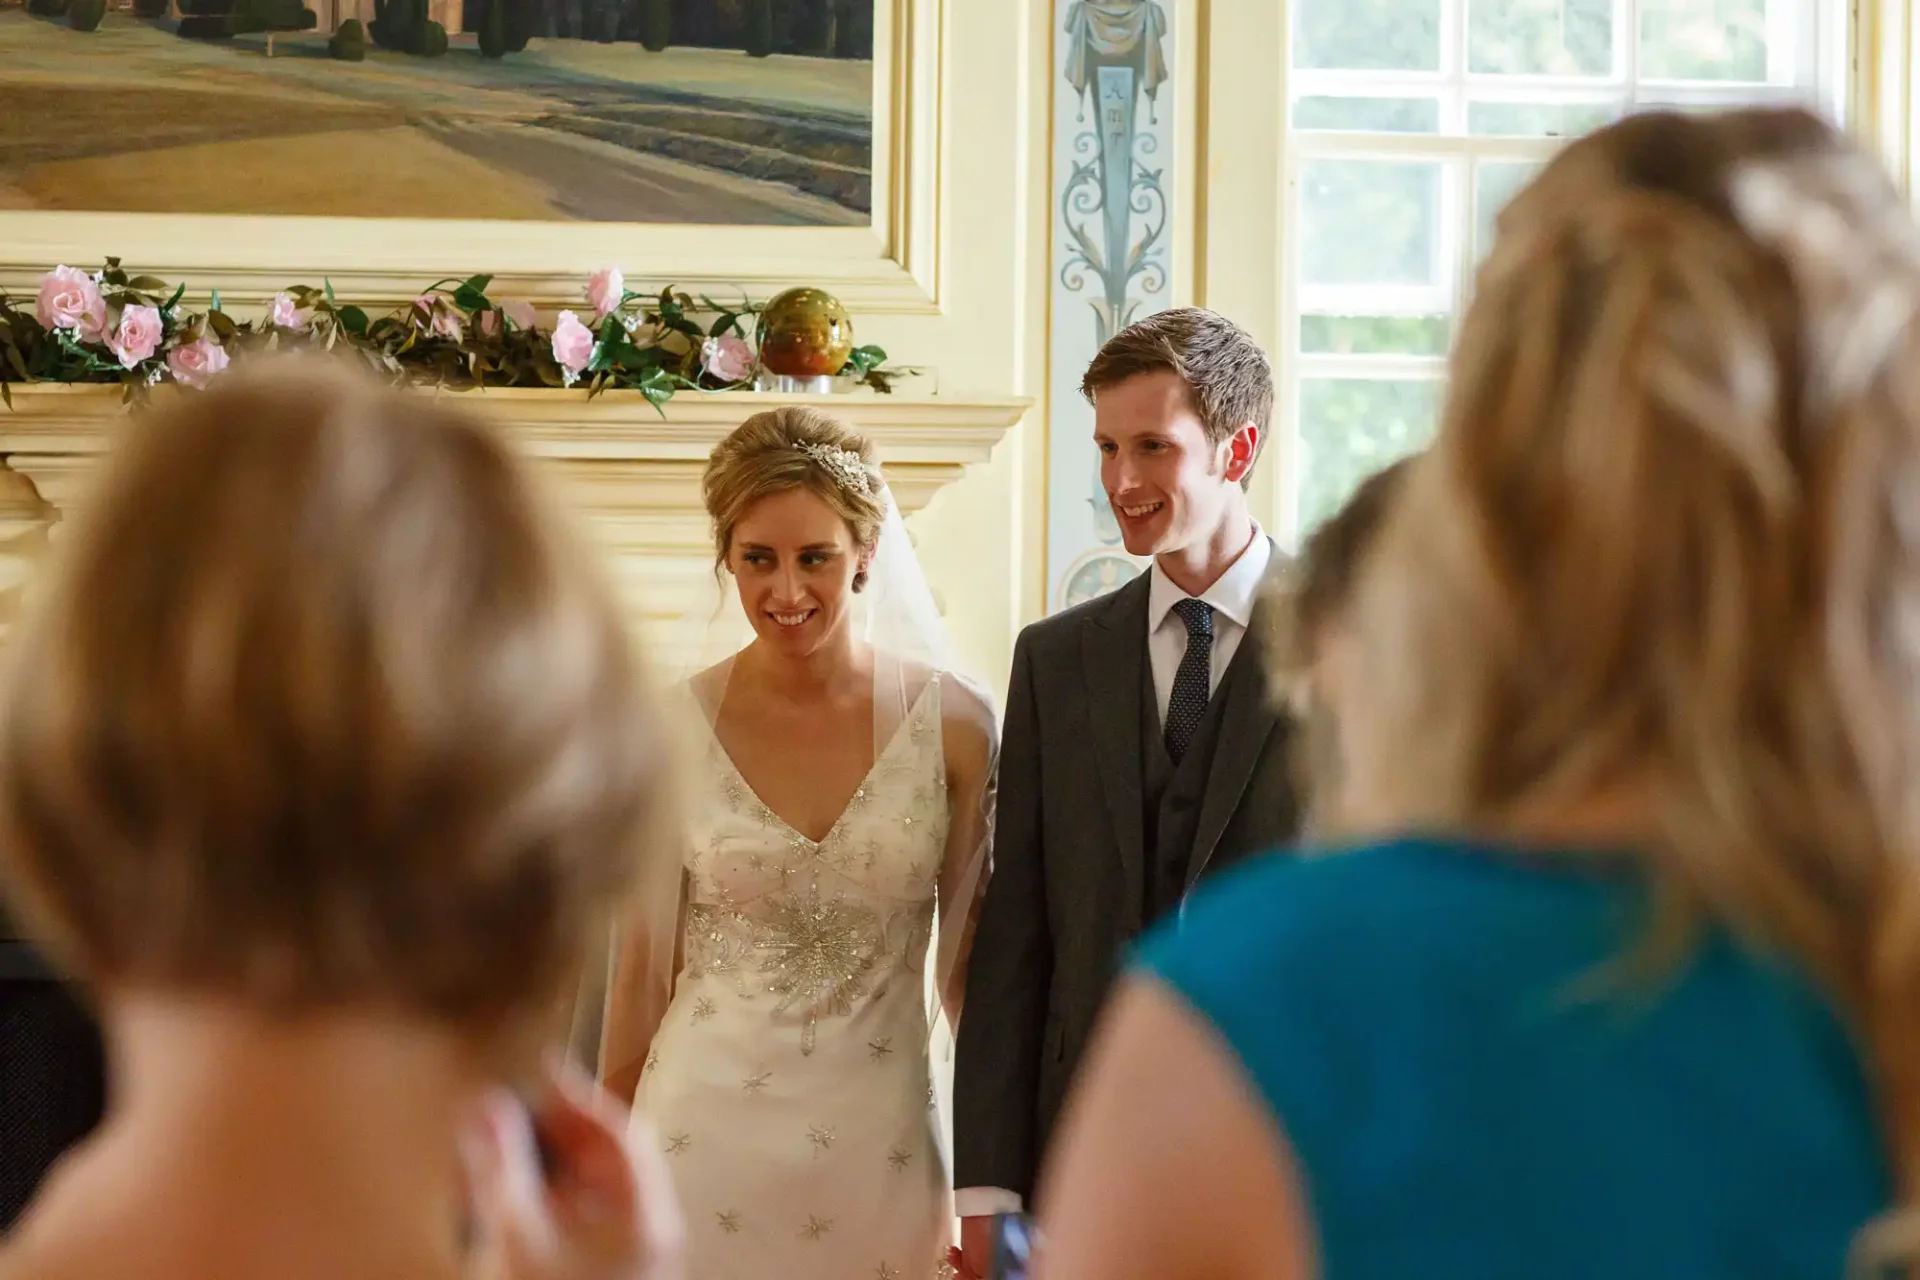 A bride and groom walking through a room smiling, surrounded by guests in an elegant interior with floral decorations.